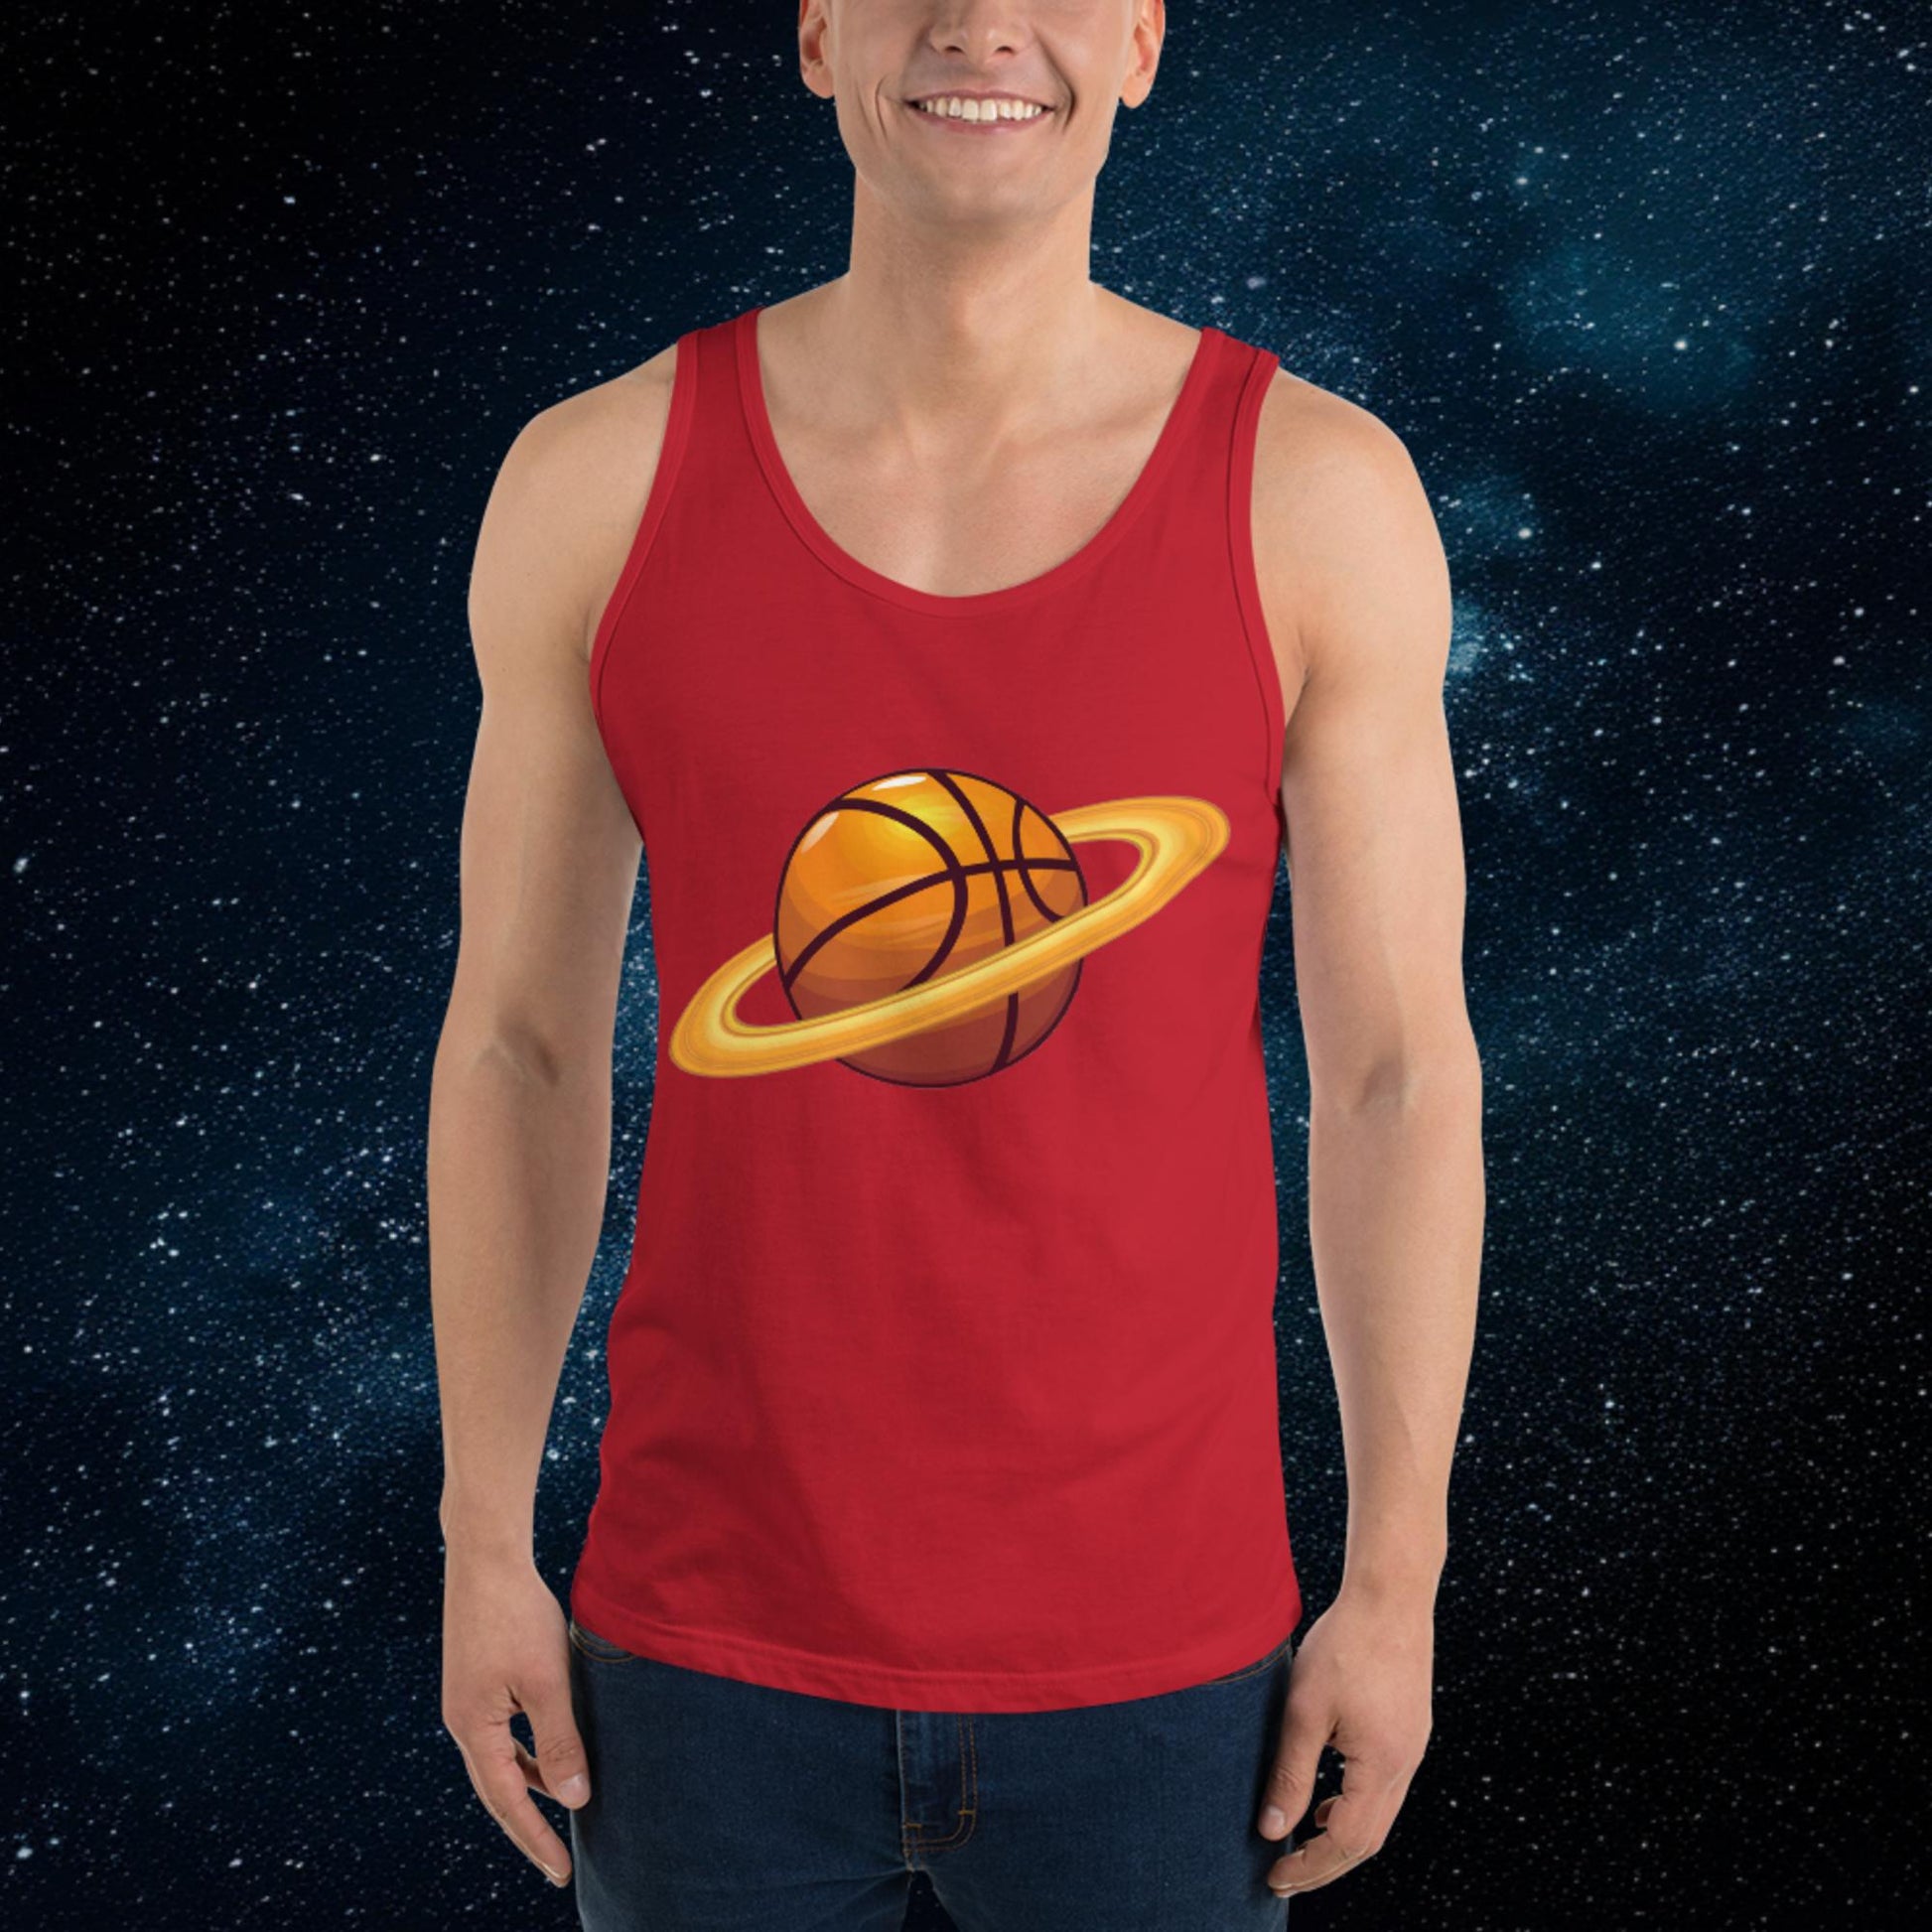 Basketball Planet Ball is Life Tank Top Next Cult Brand